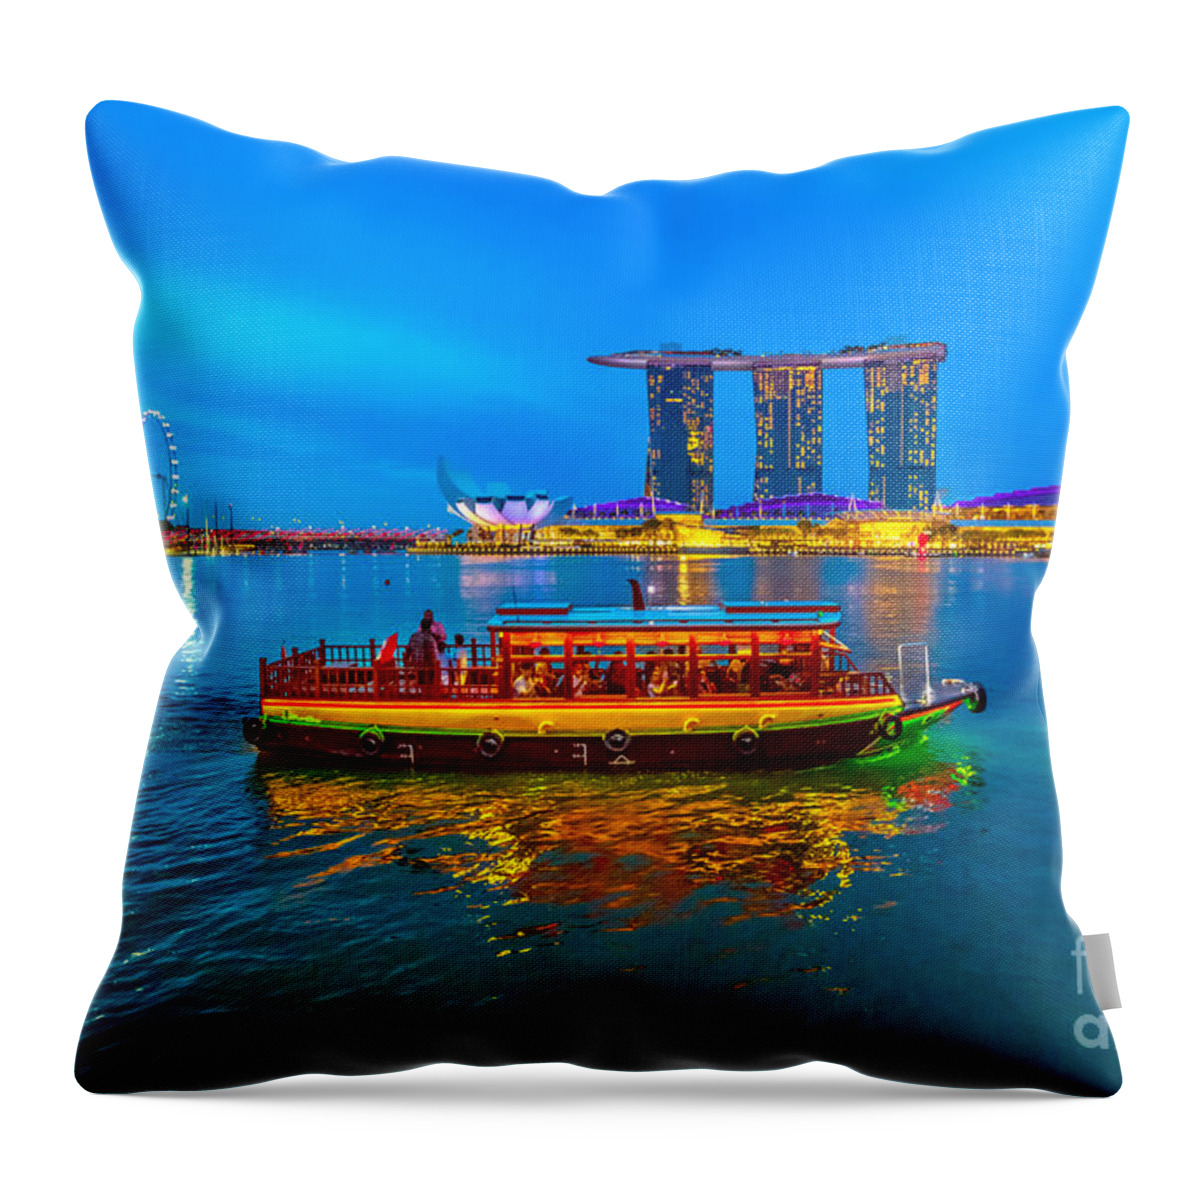 Singapore Throw Pillow featuring the photograph Singapore Harbor Skyline by Benny Marty